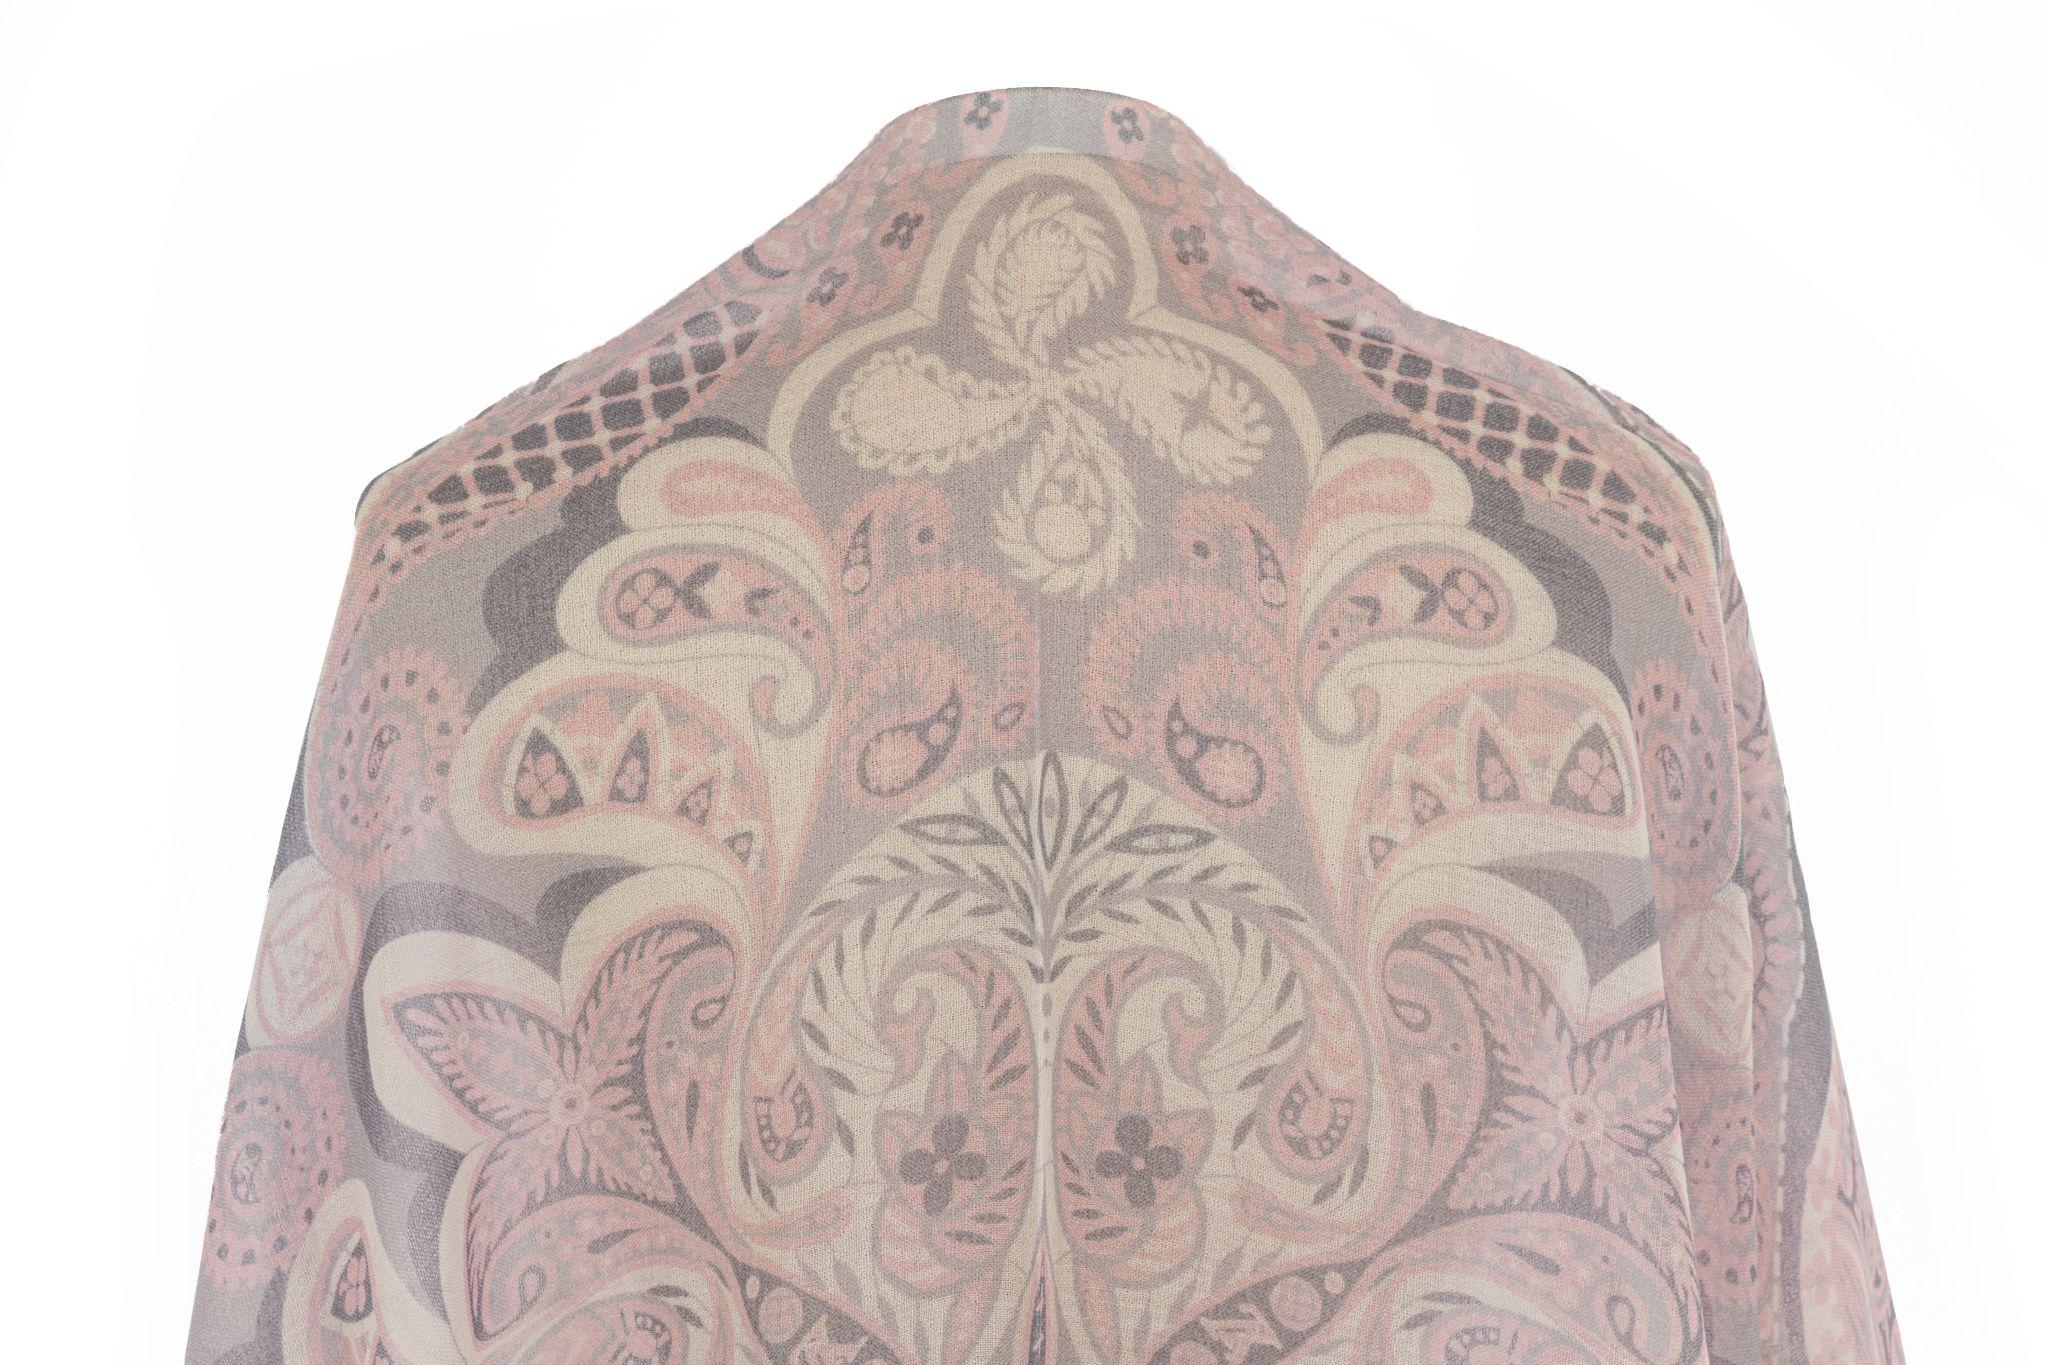 Louis Vuitton cashmere and wool mix shawl with a floral print and paisley in rosé and grey. The piece is in excellent condition.